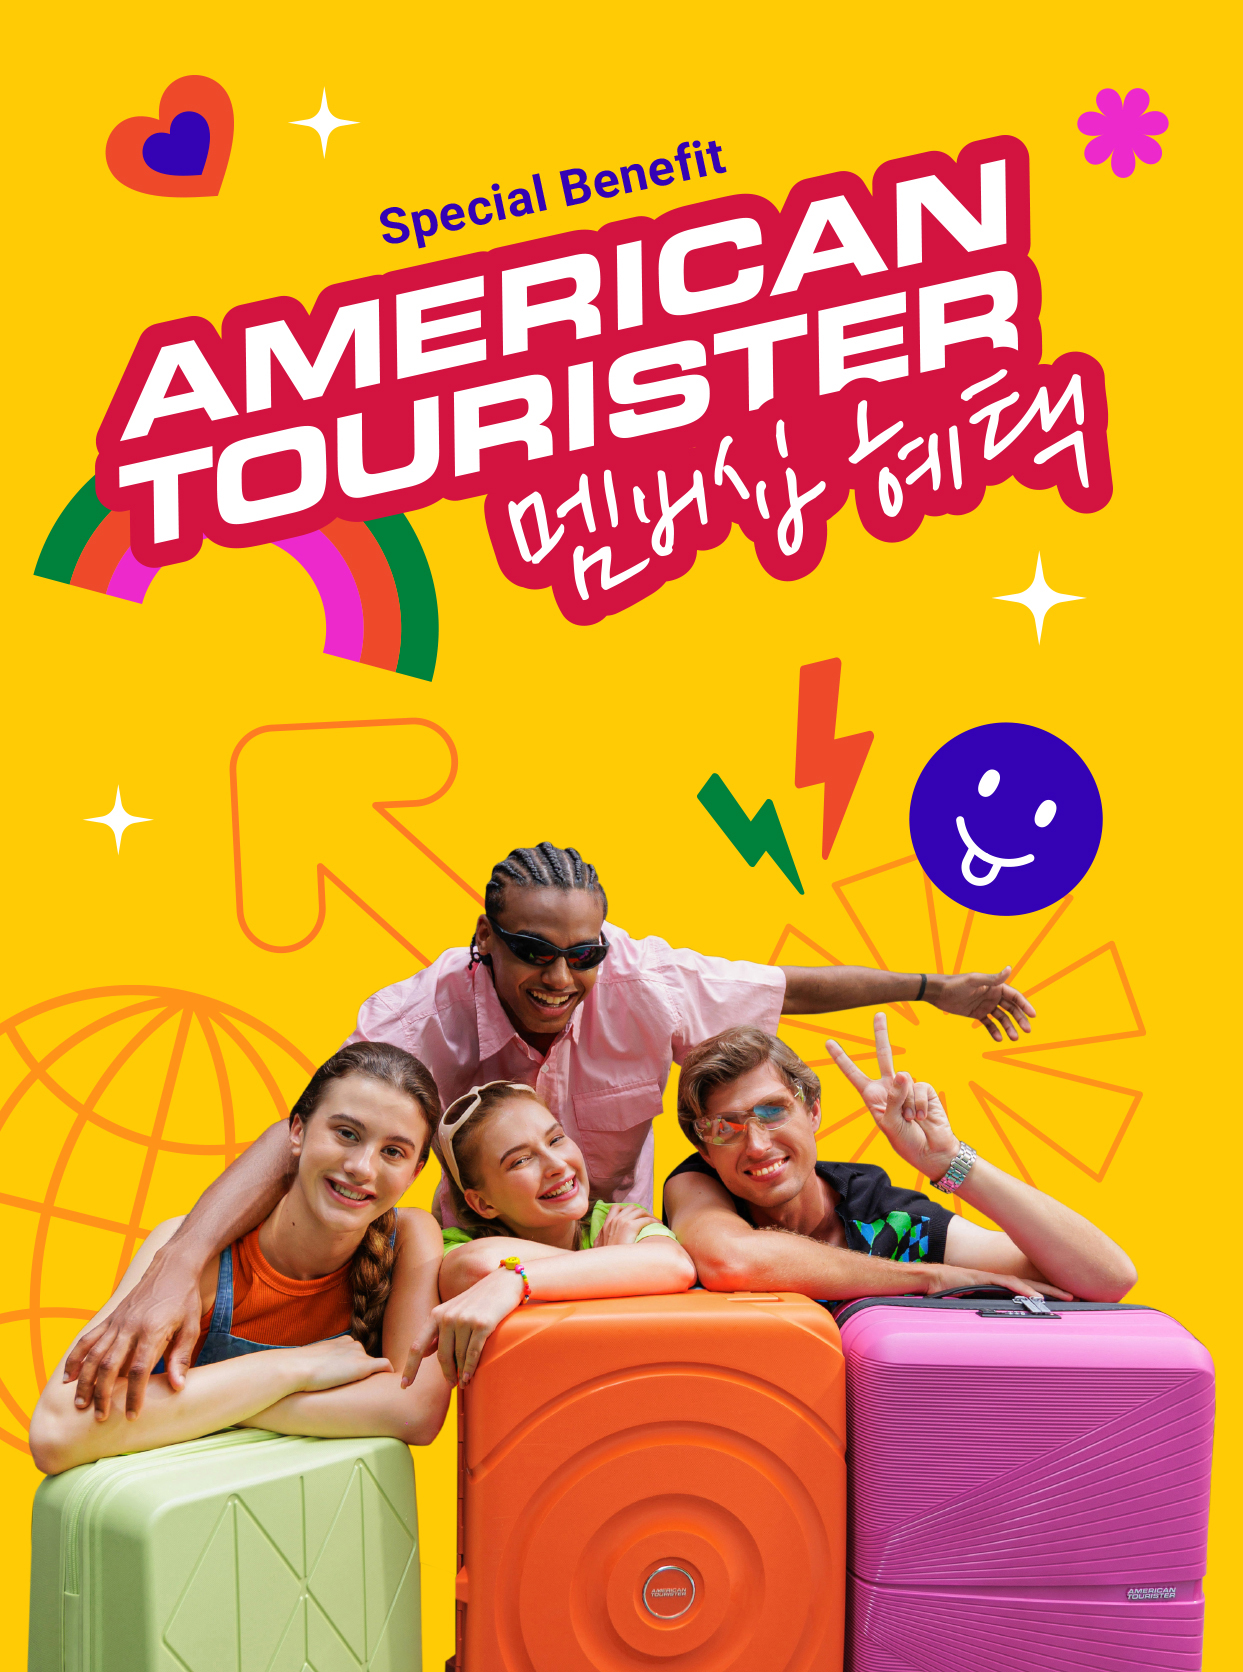 Special Benefit AMERICAN TOURISTER 멤버십 혜택